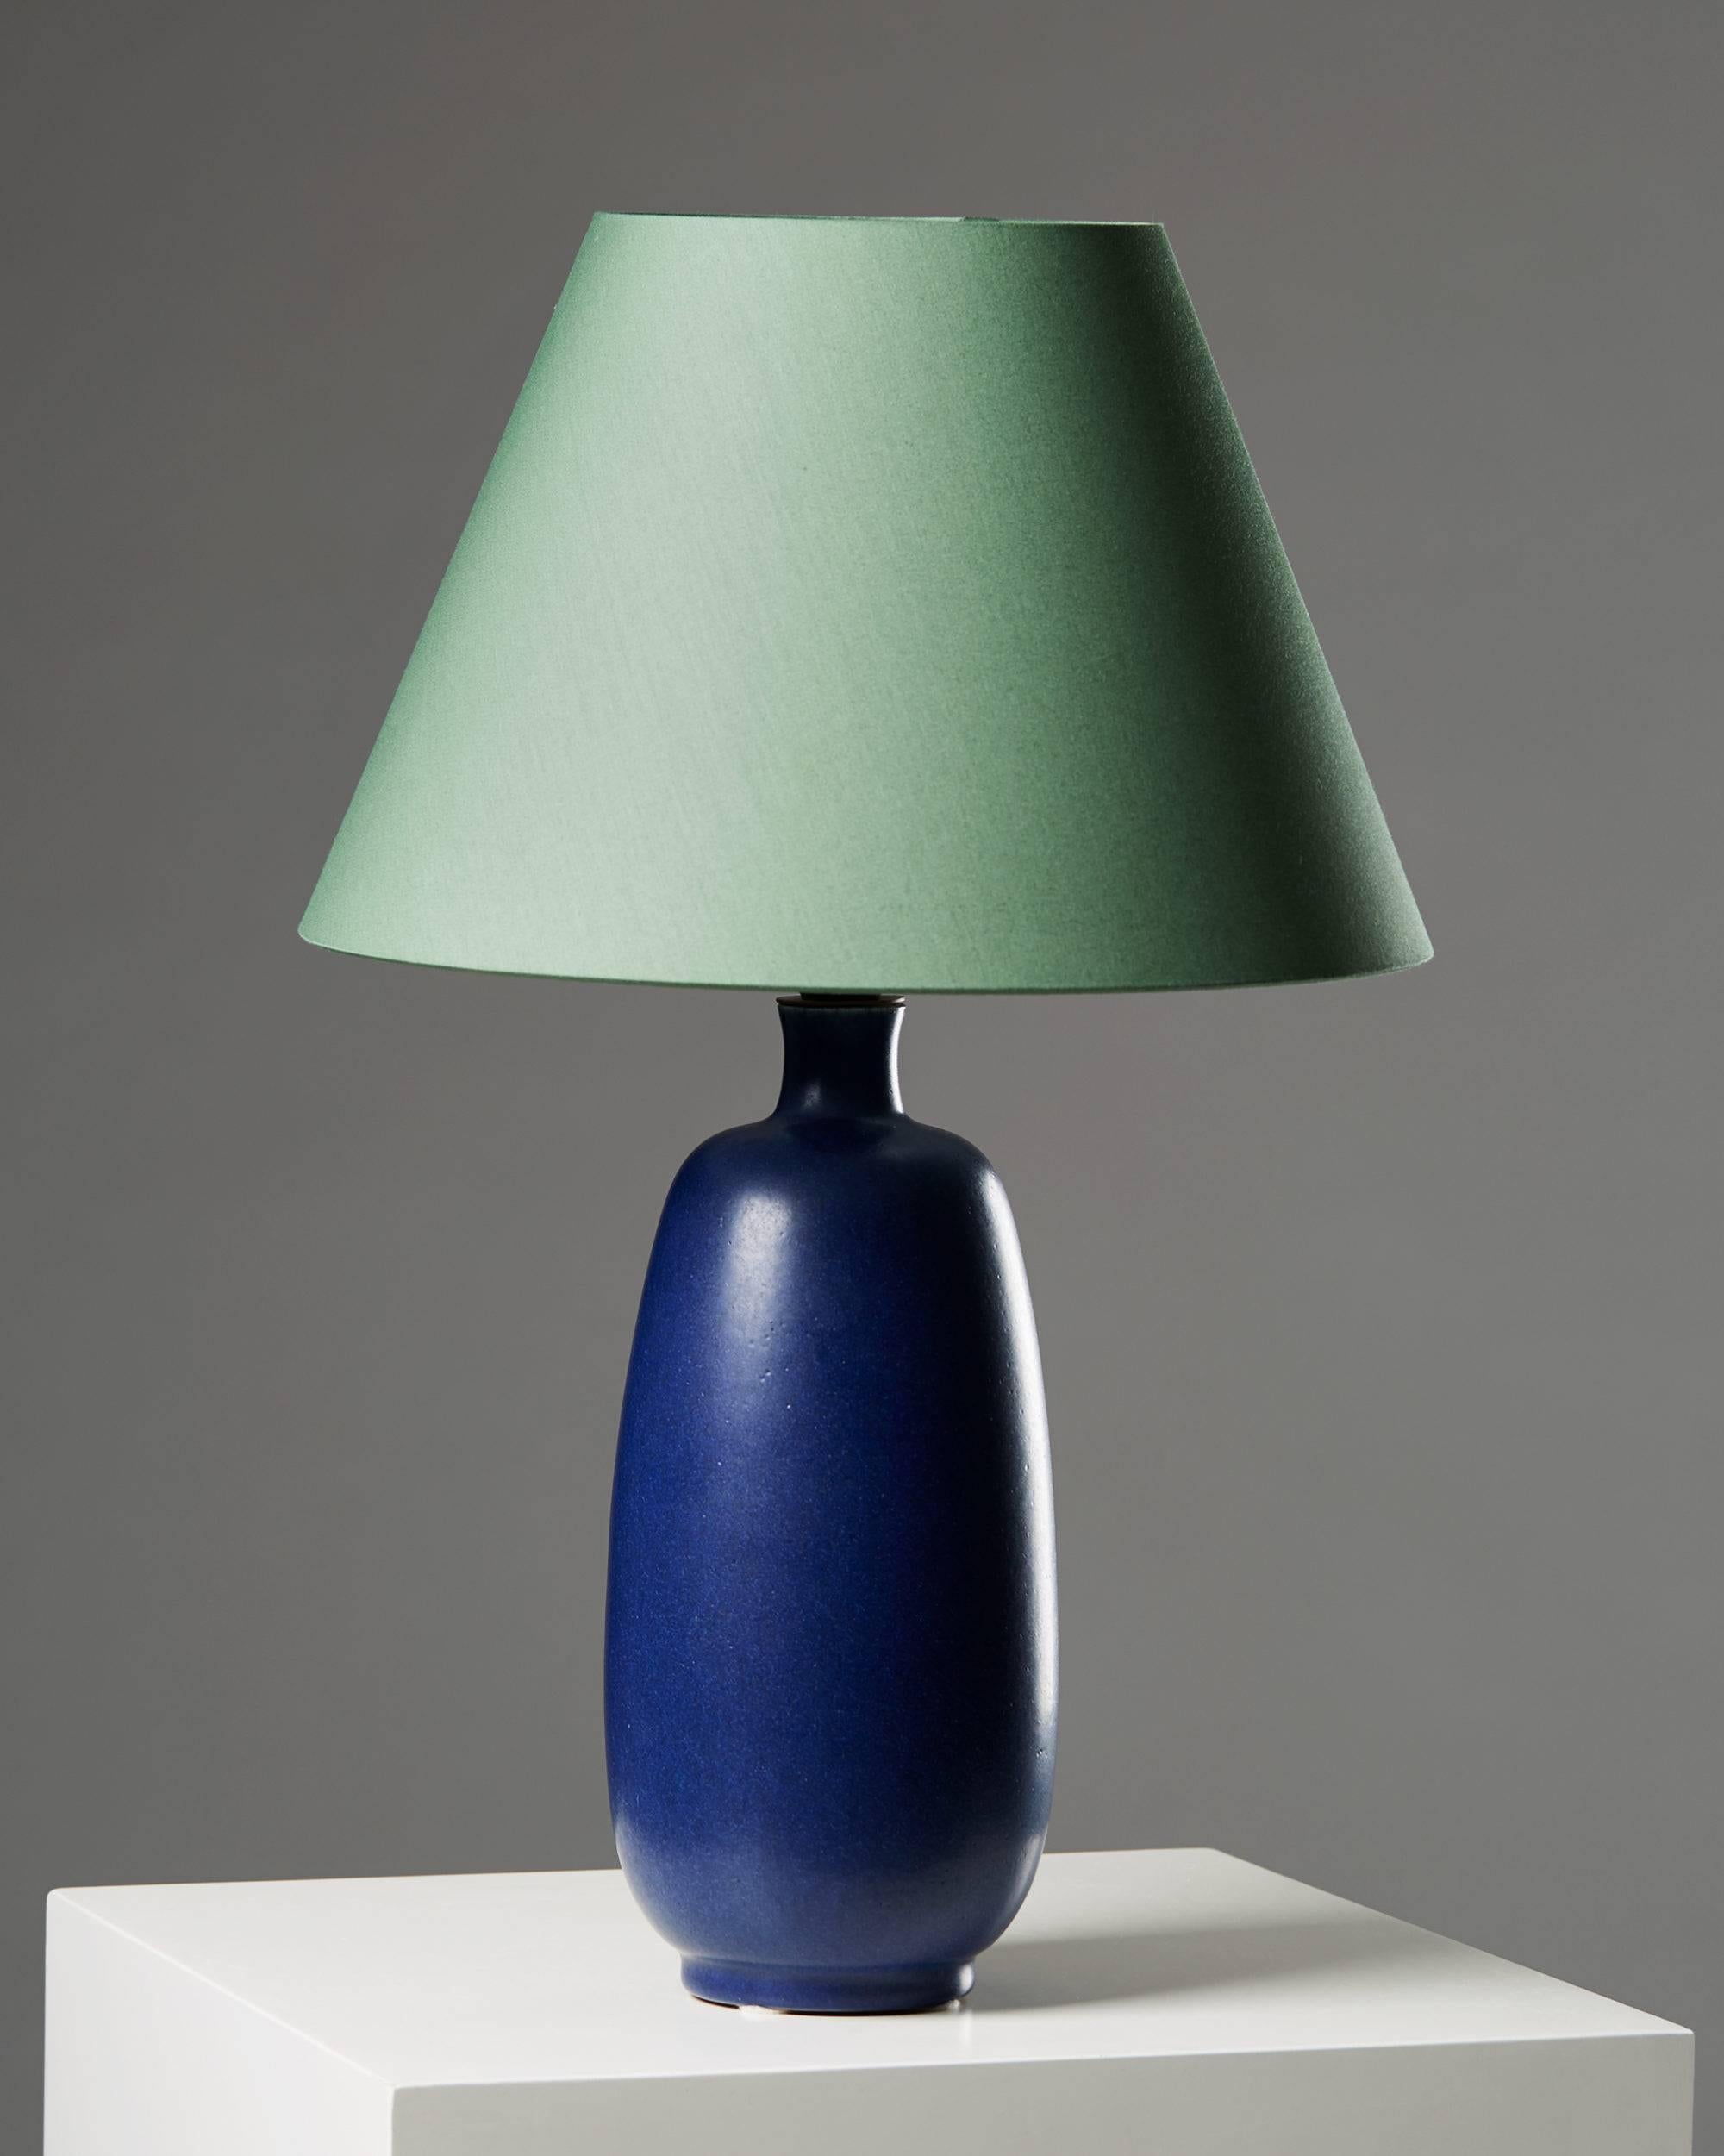 Table lamp designed by Ingrid and Erich Triller for Tobo, 
Sweden, 1950s.

Stoneware and fabric shade.

Measures: H 50.5 cm/ 19 7/8